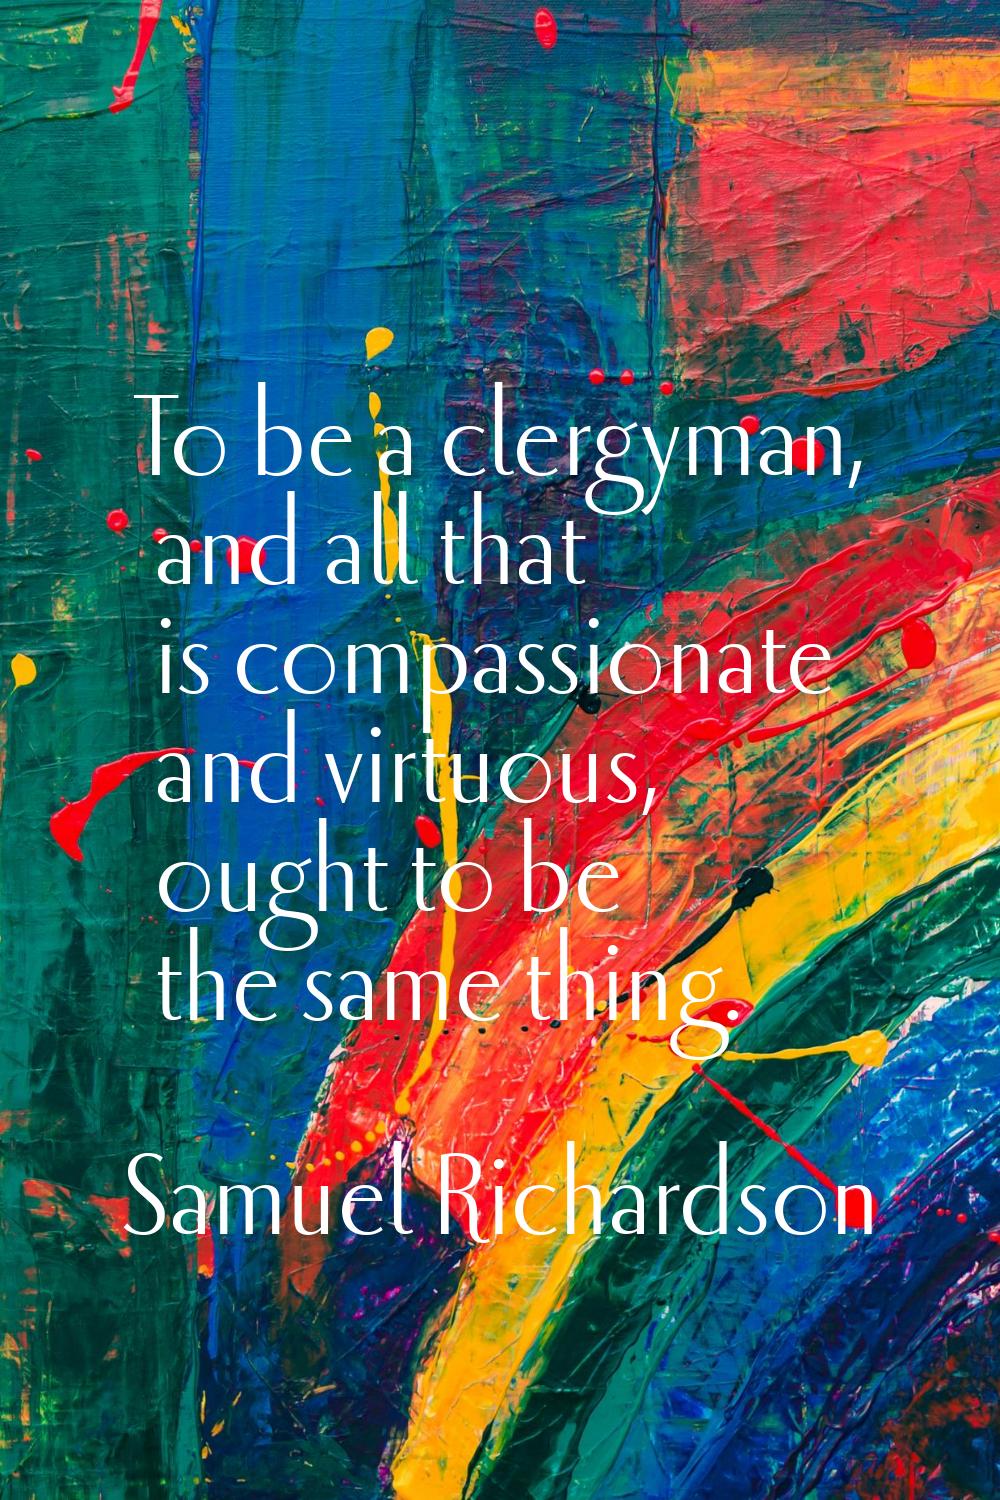 To be a clergyman, and all that is compassionate and virtuous, ought to be the same thing.